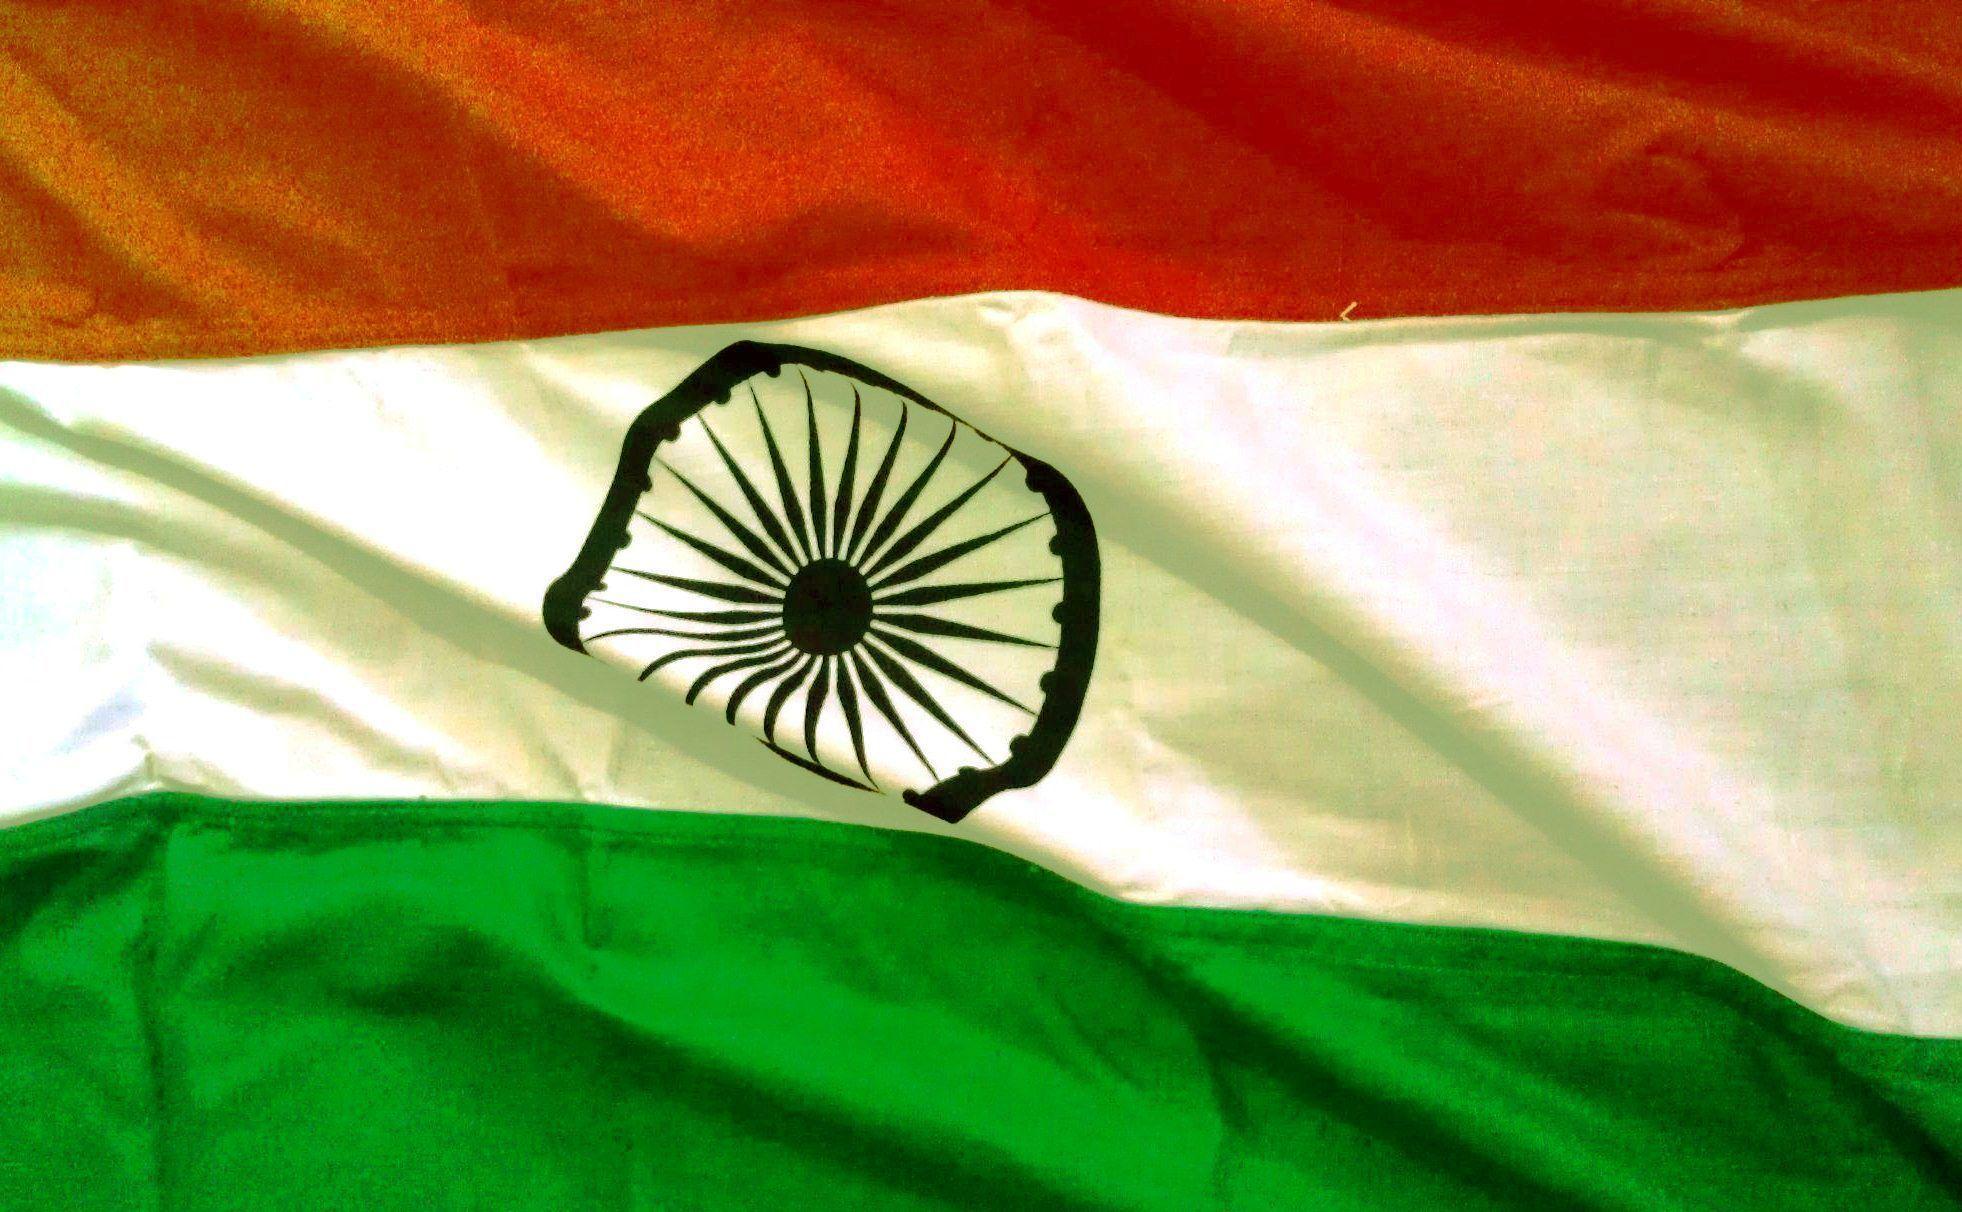 New} Indian Flag HD Wallpaper Image 2015 Independence Day